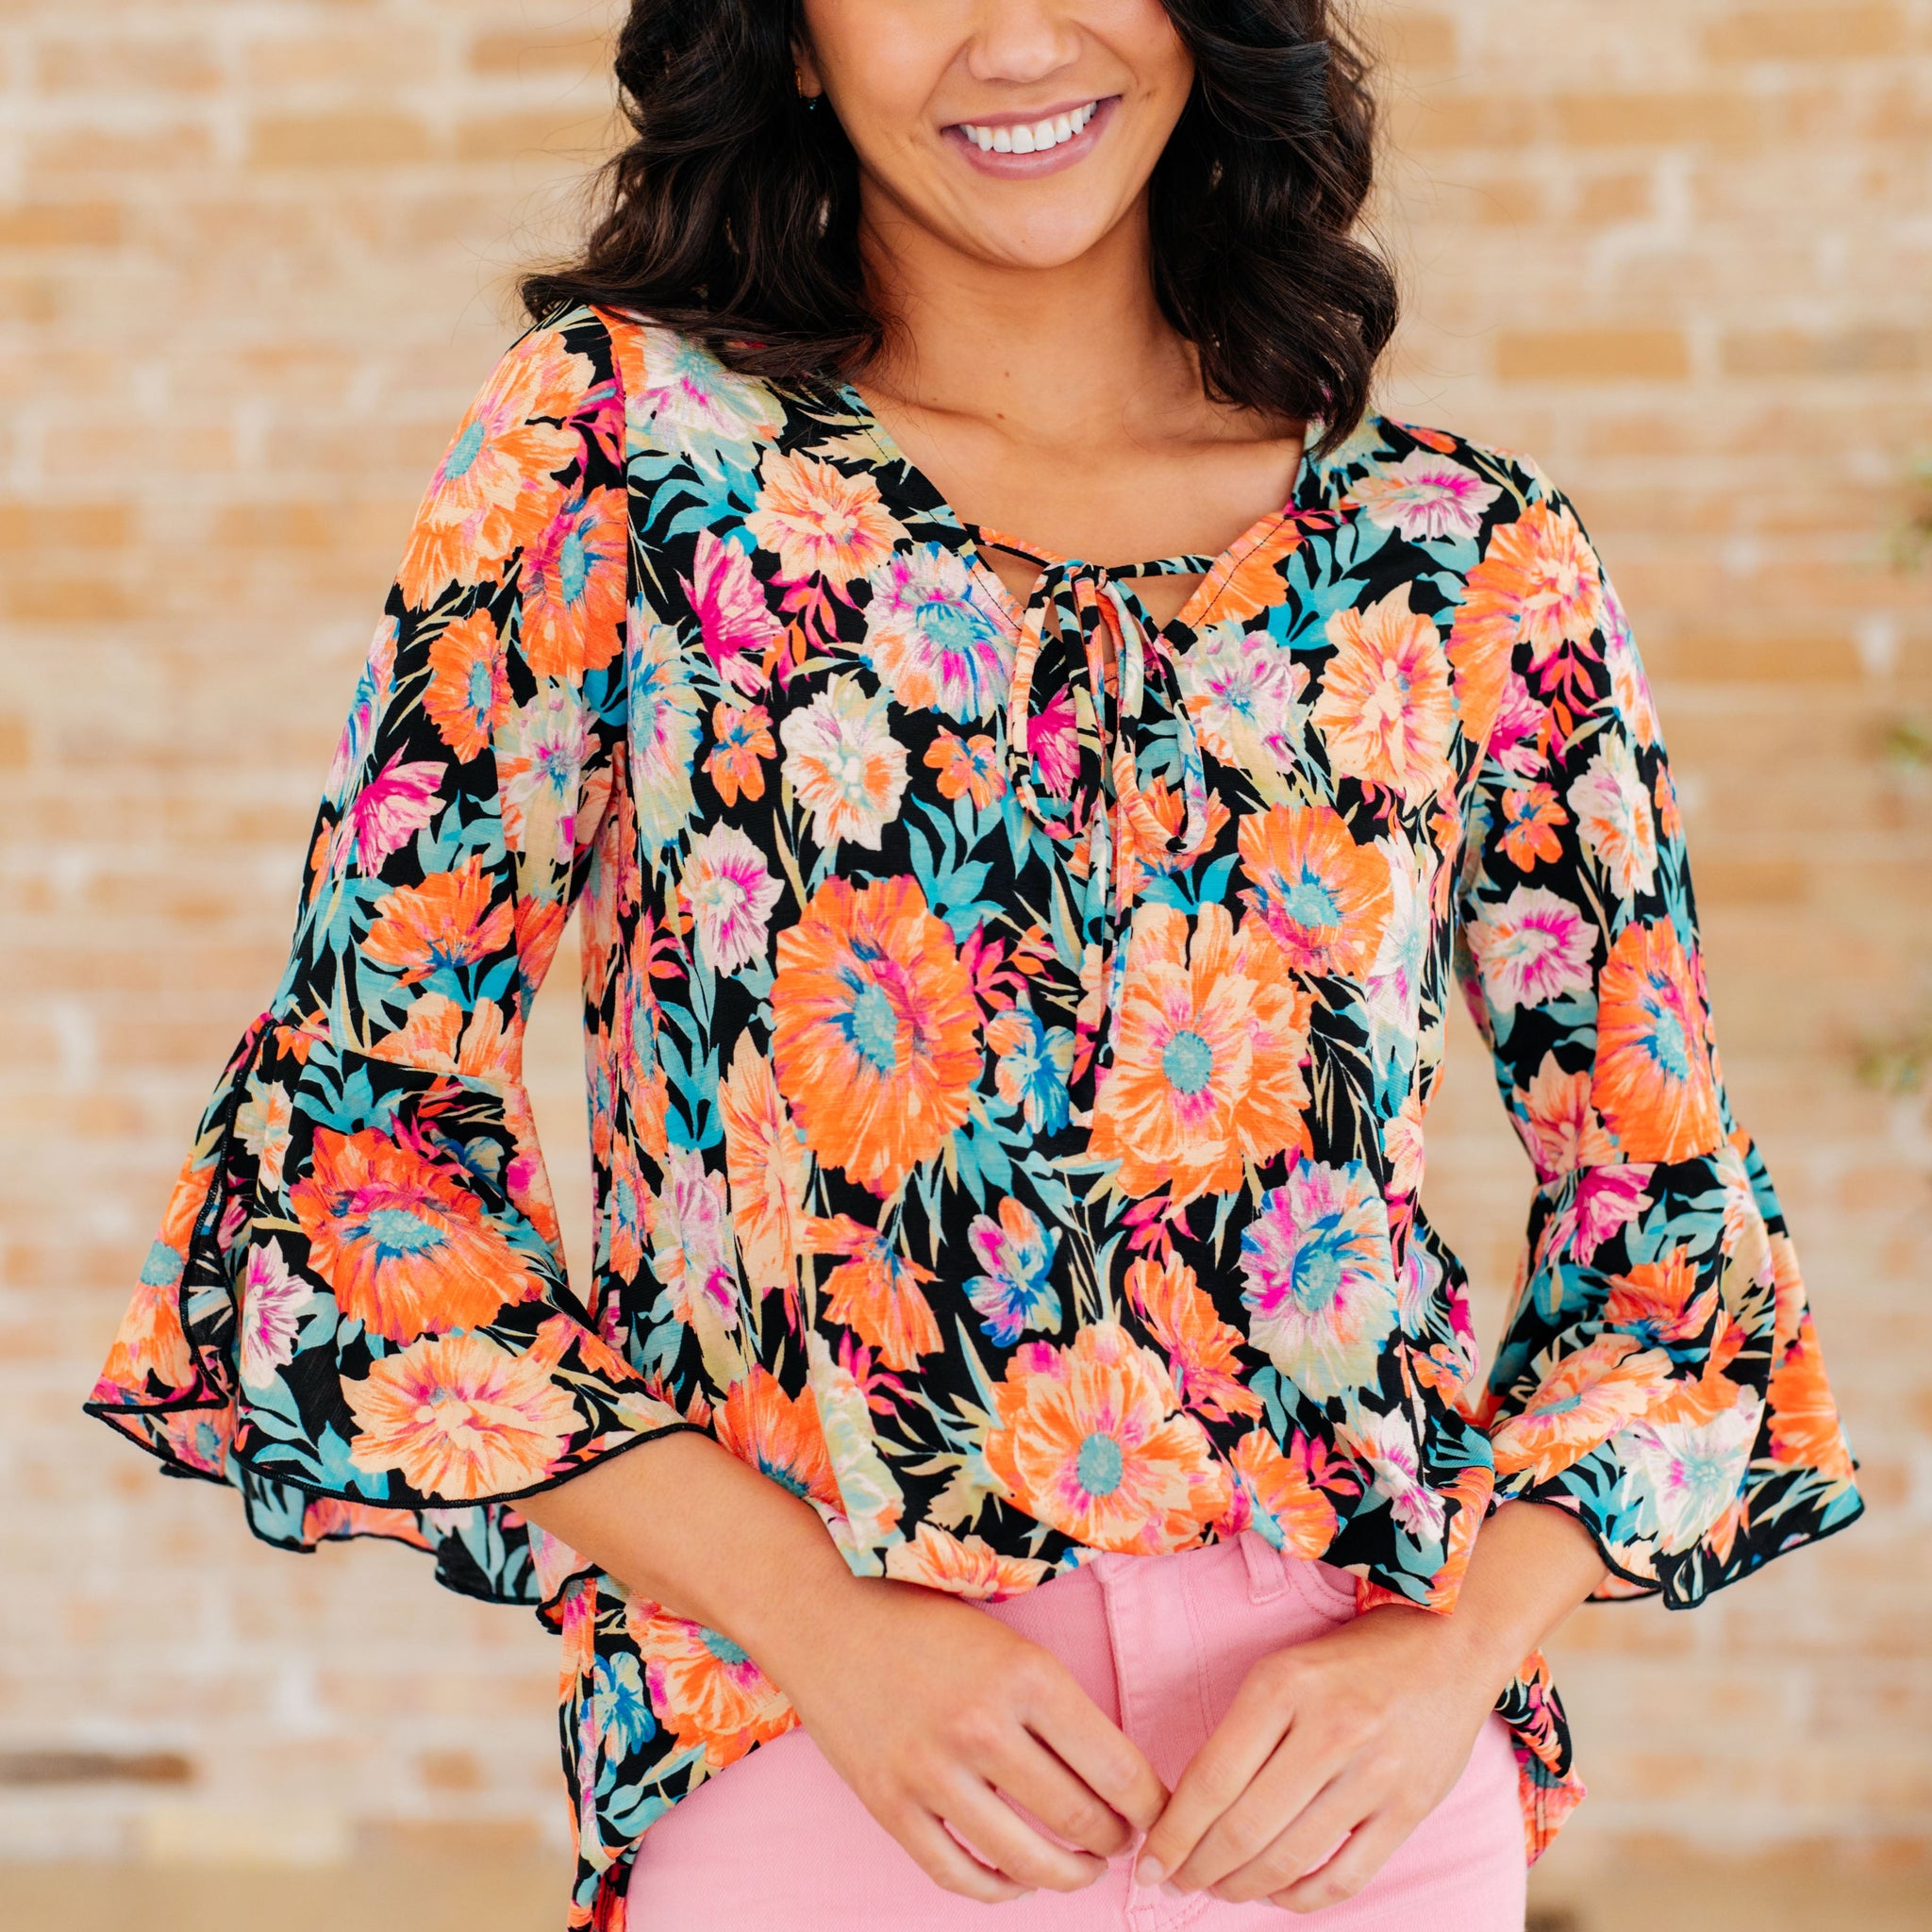 Willow Bell Sleeve Top in Black and Persimmon Floral